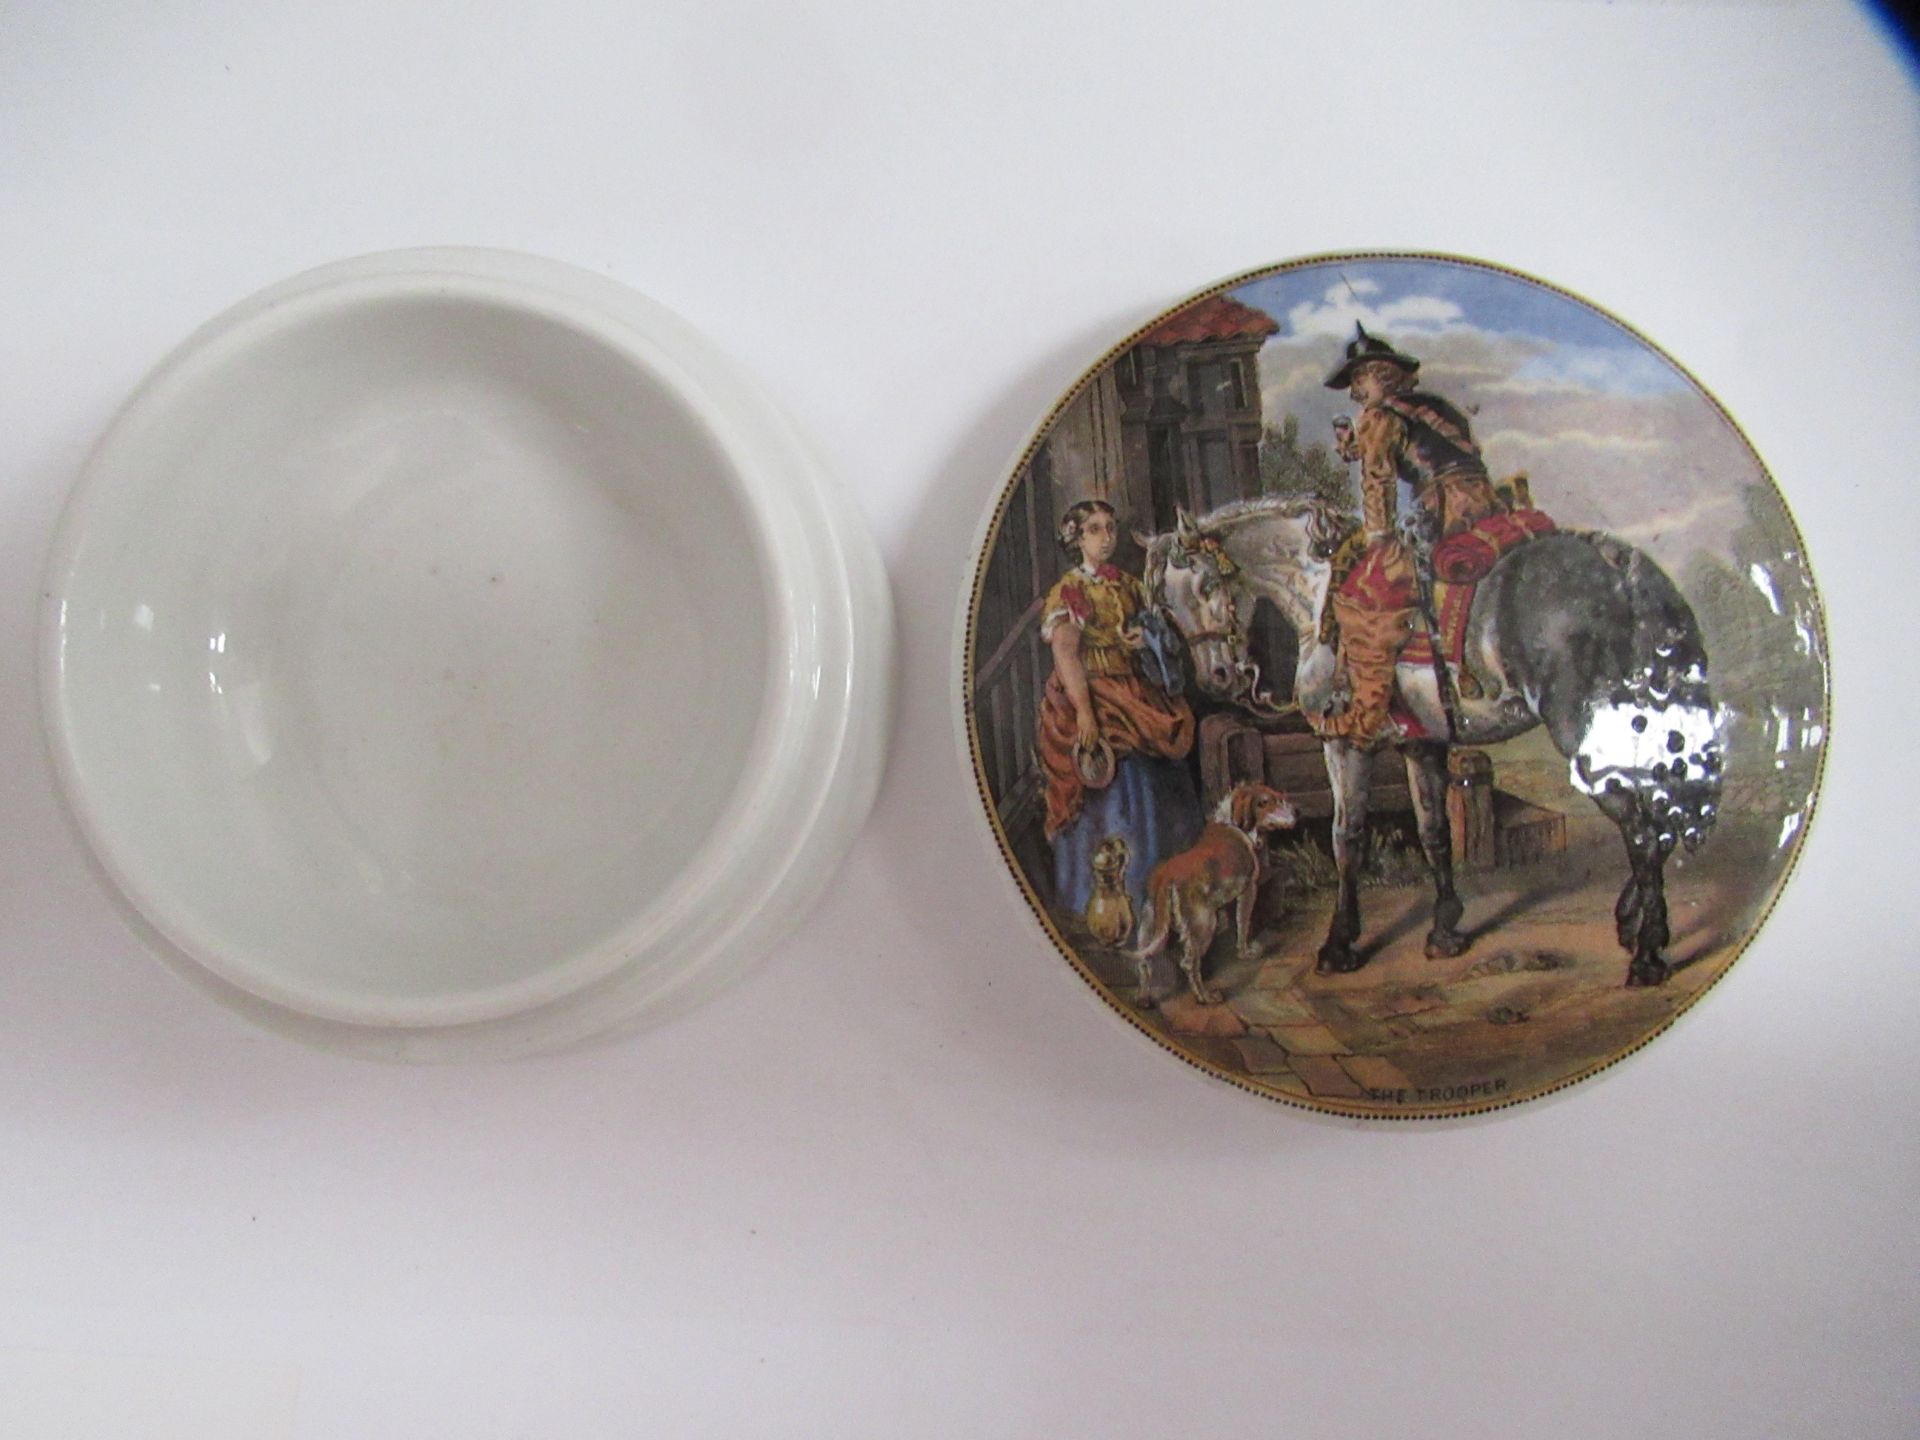 6x Prattware ceramic lids including 'Persuasion', 'The Chin-Chew River', 'Wouvermann Pinx', 'P. Wouv - Image 22 of 28